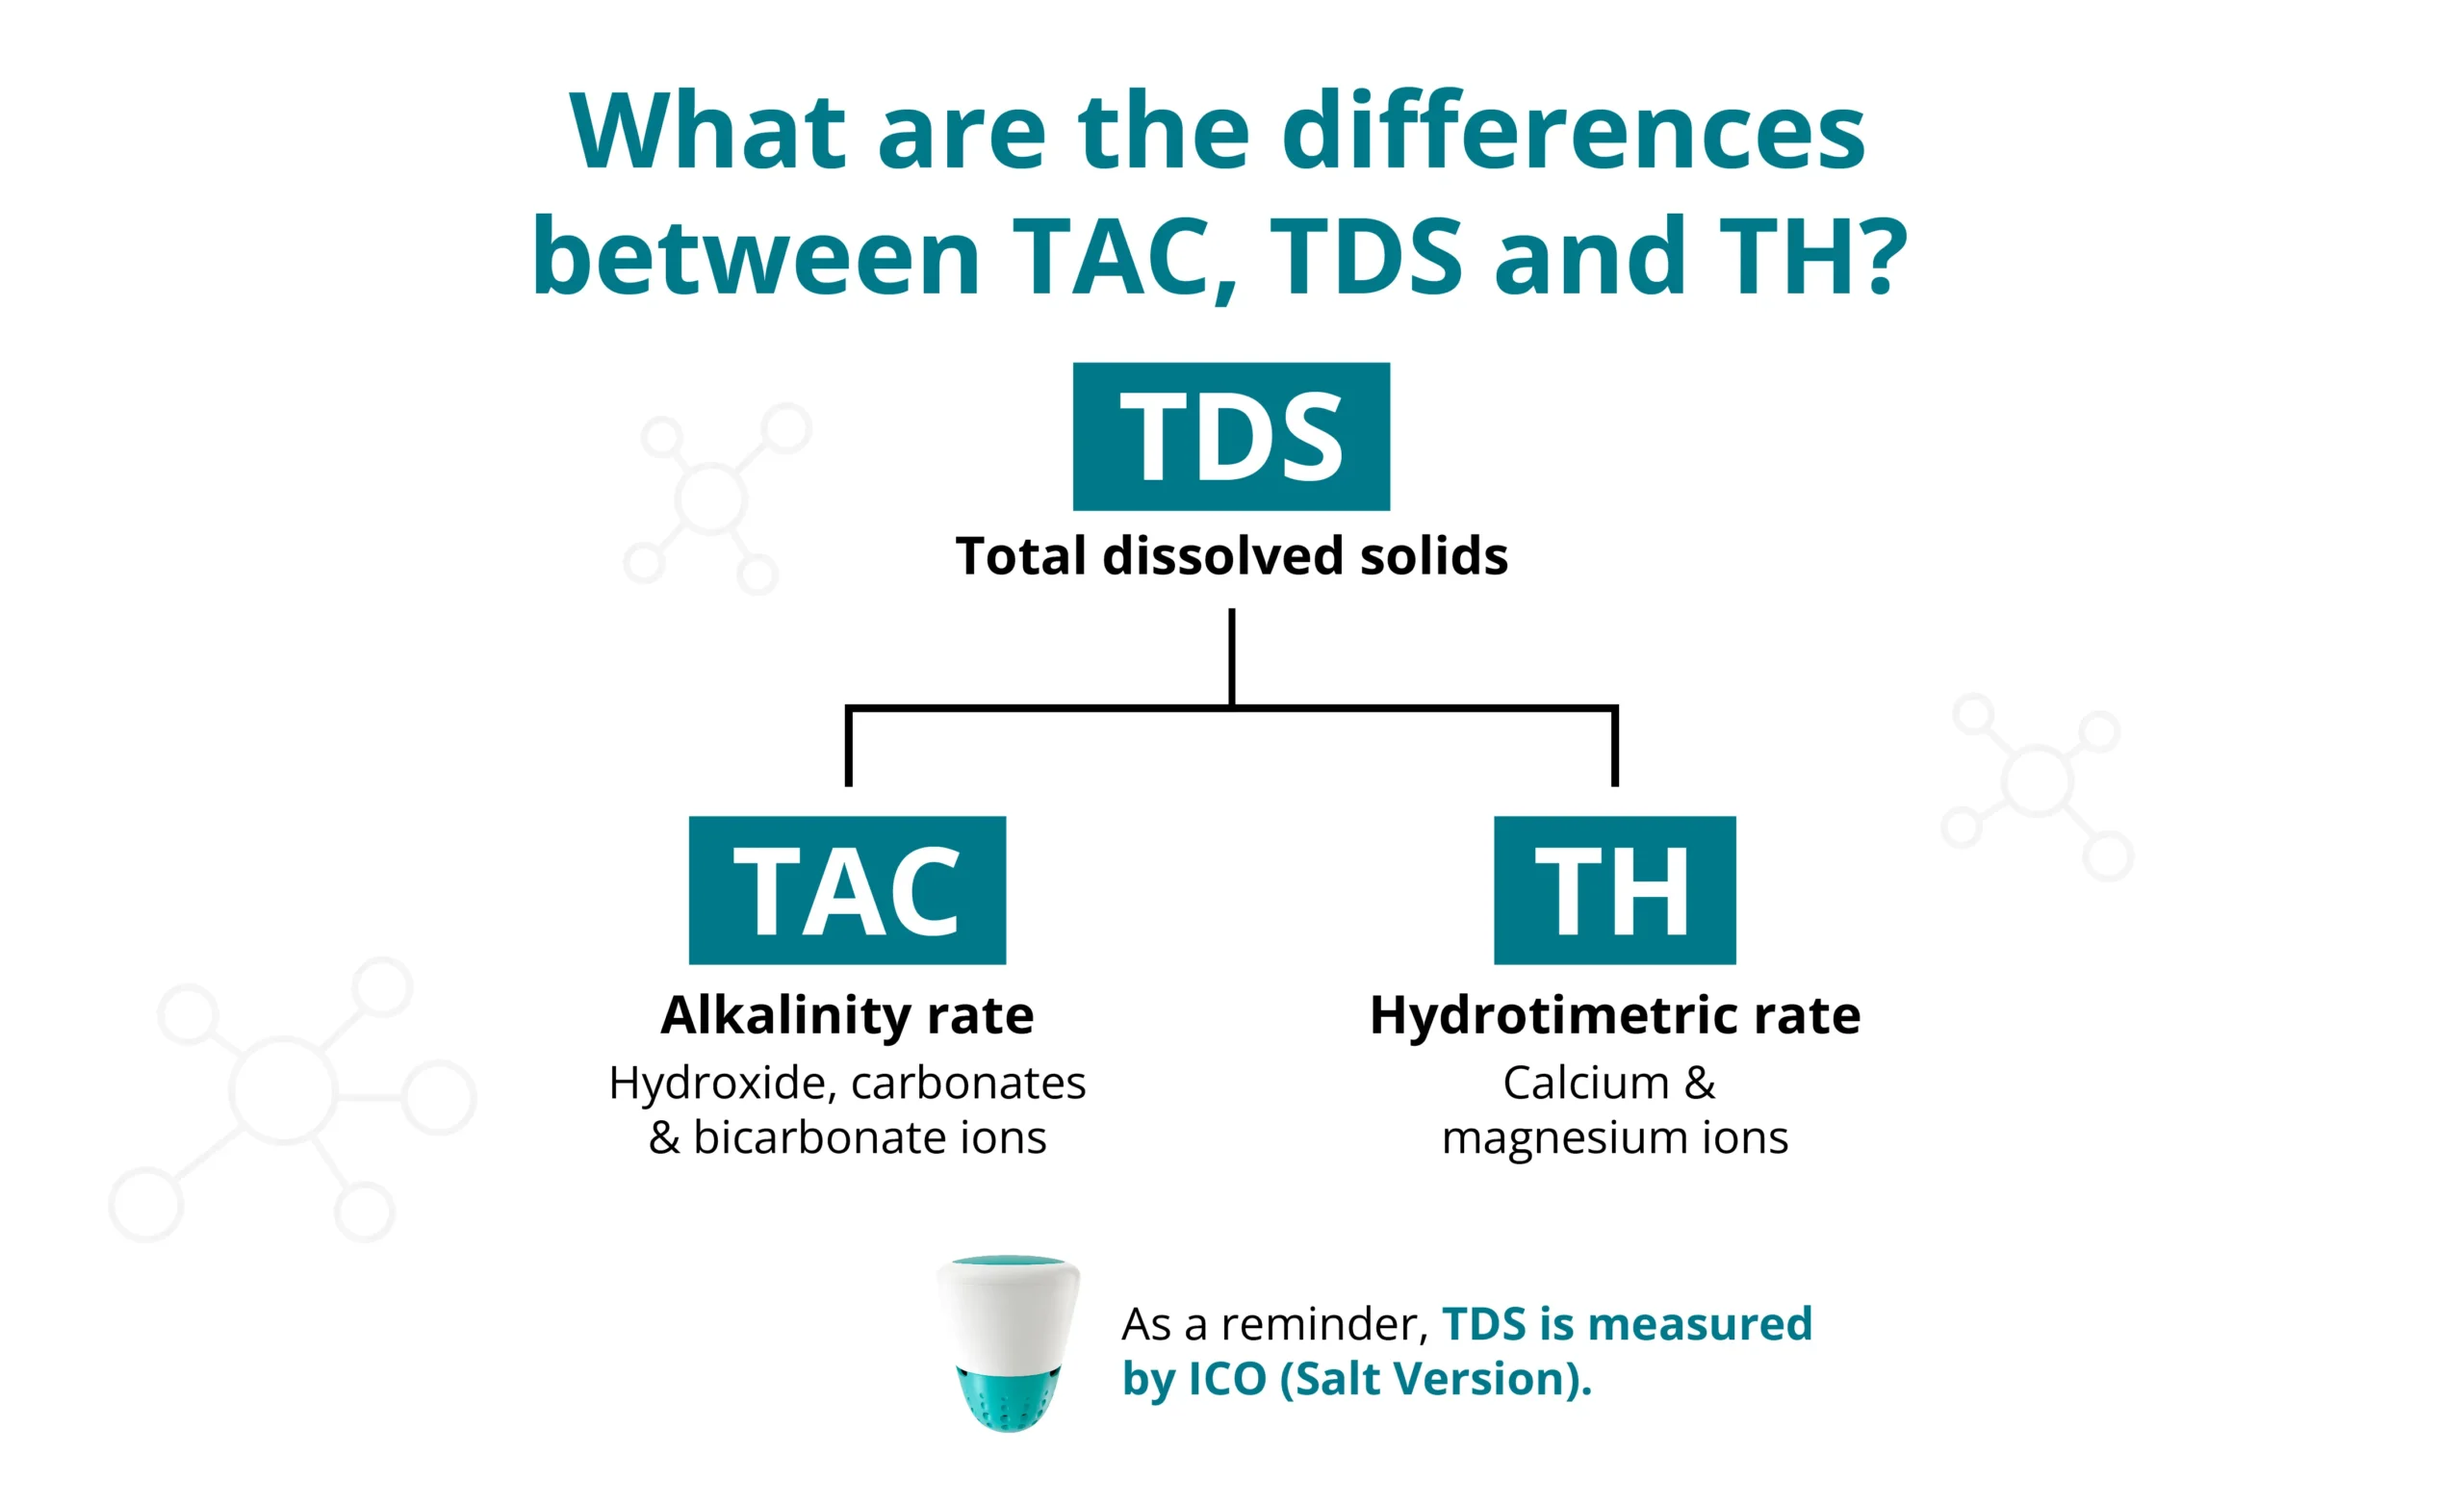 ICO measures TDS, which is more reliable than TH or TAC measurements, which only measure certain ions. 